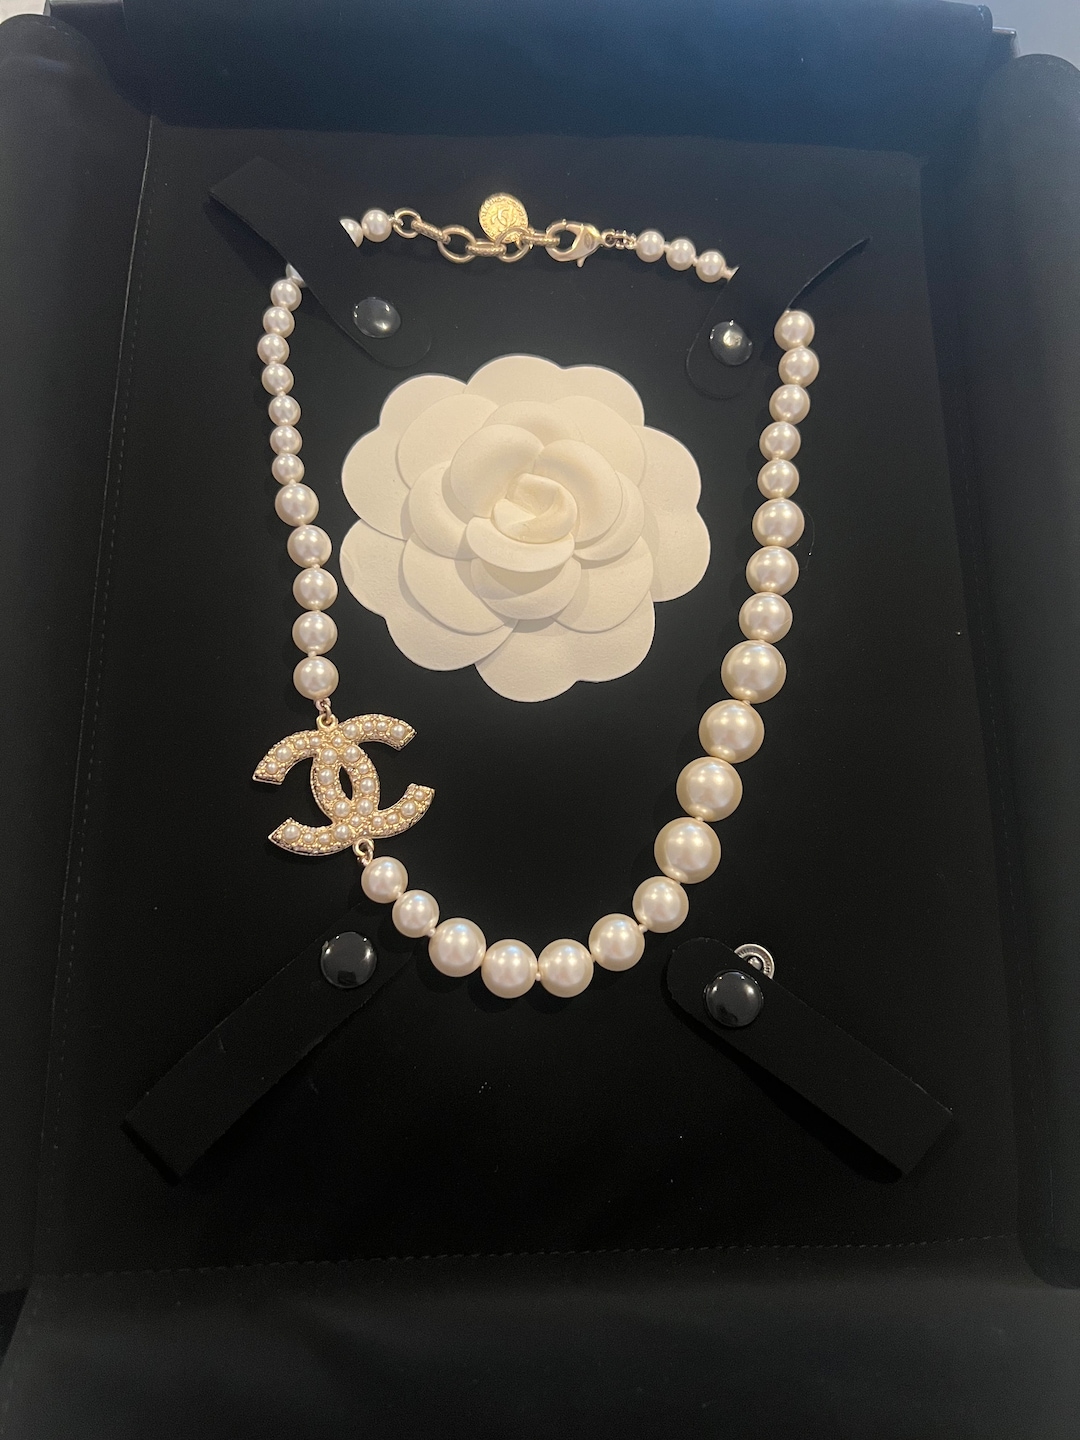 CHANEL Pearl CC 100th Anniversary Necklace Light Gold 881142